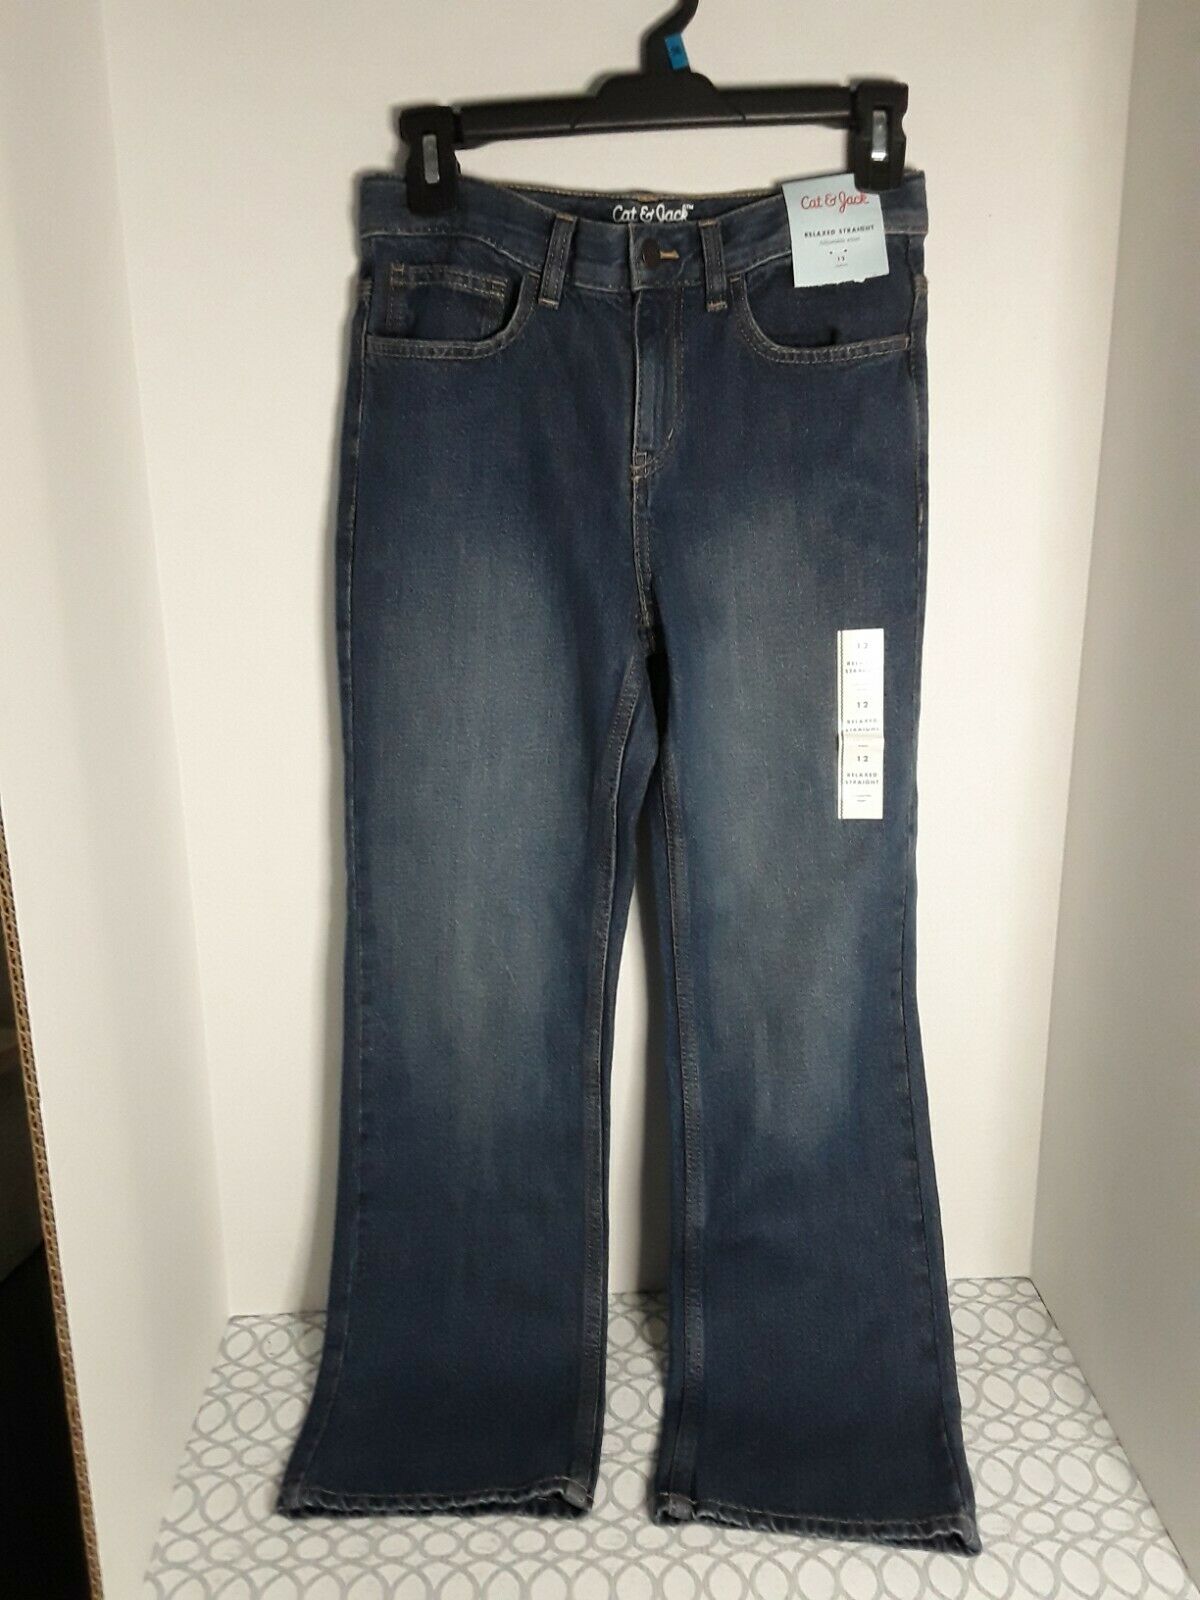 Cat & Jack Kids Relaxed Straight Adjustable Waist Blue Jeans Size 12 New